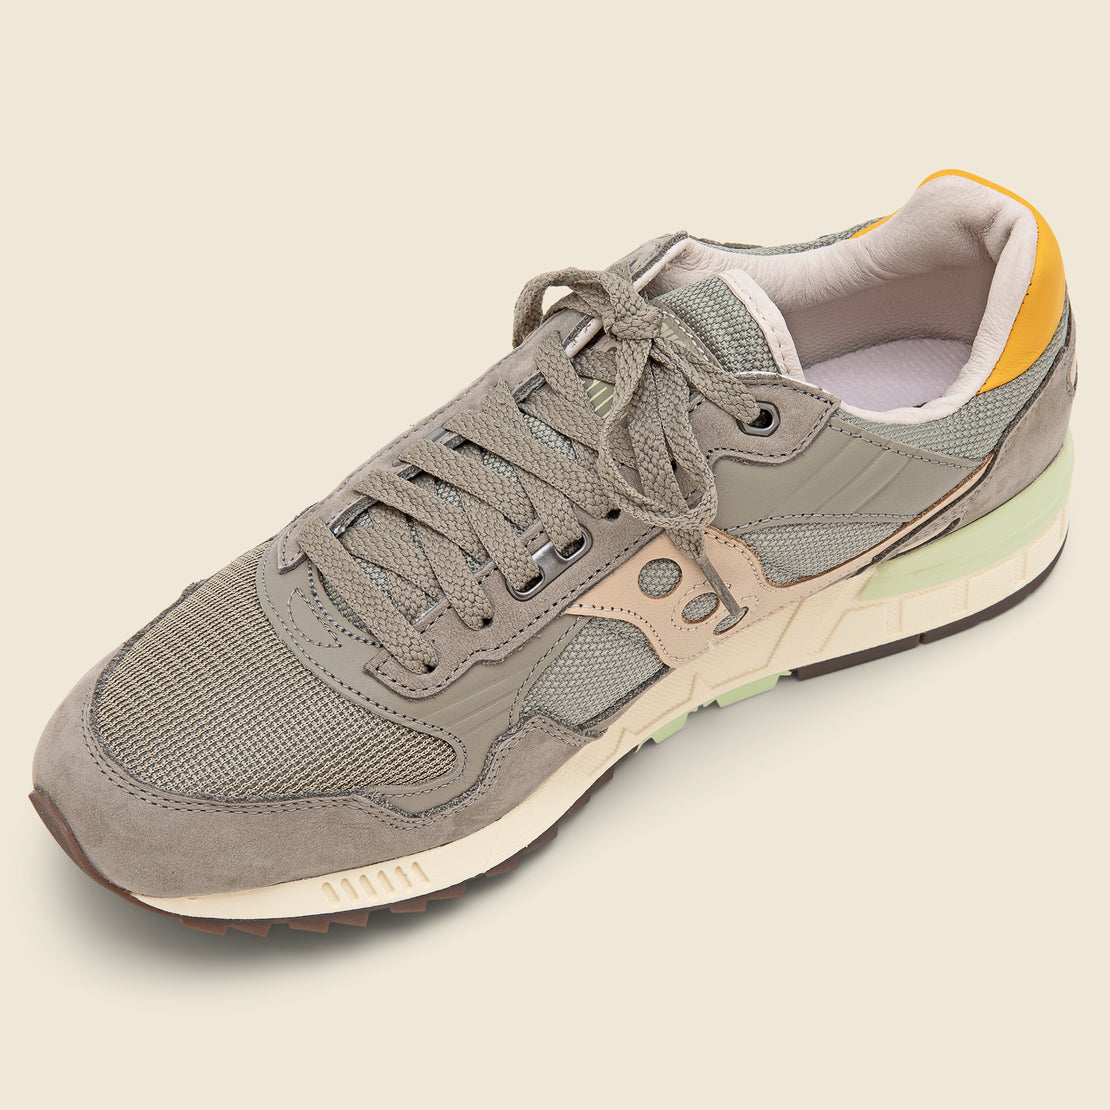 Shadow 5000 Sneaker - Grey/Taupe - Saucony - STAG Provisions - Shoes - Athletic